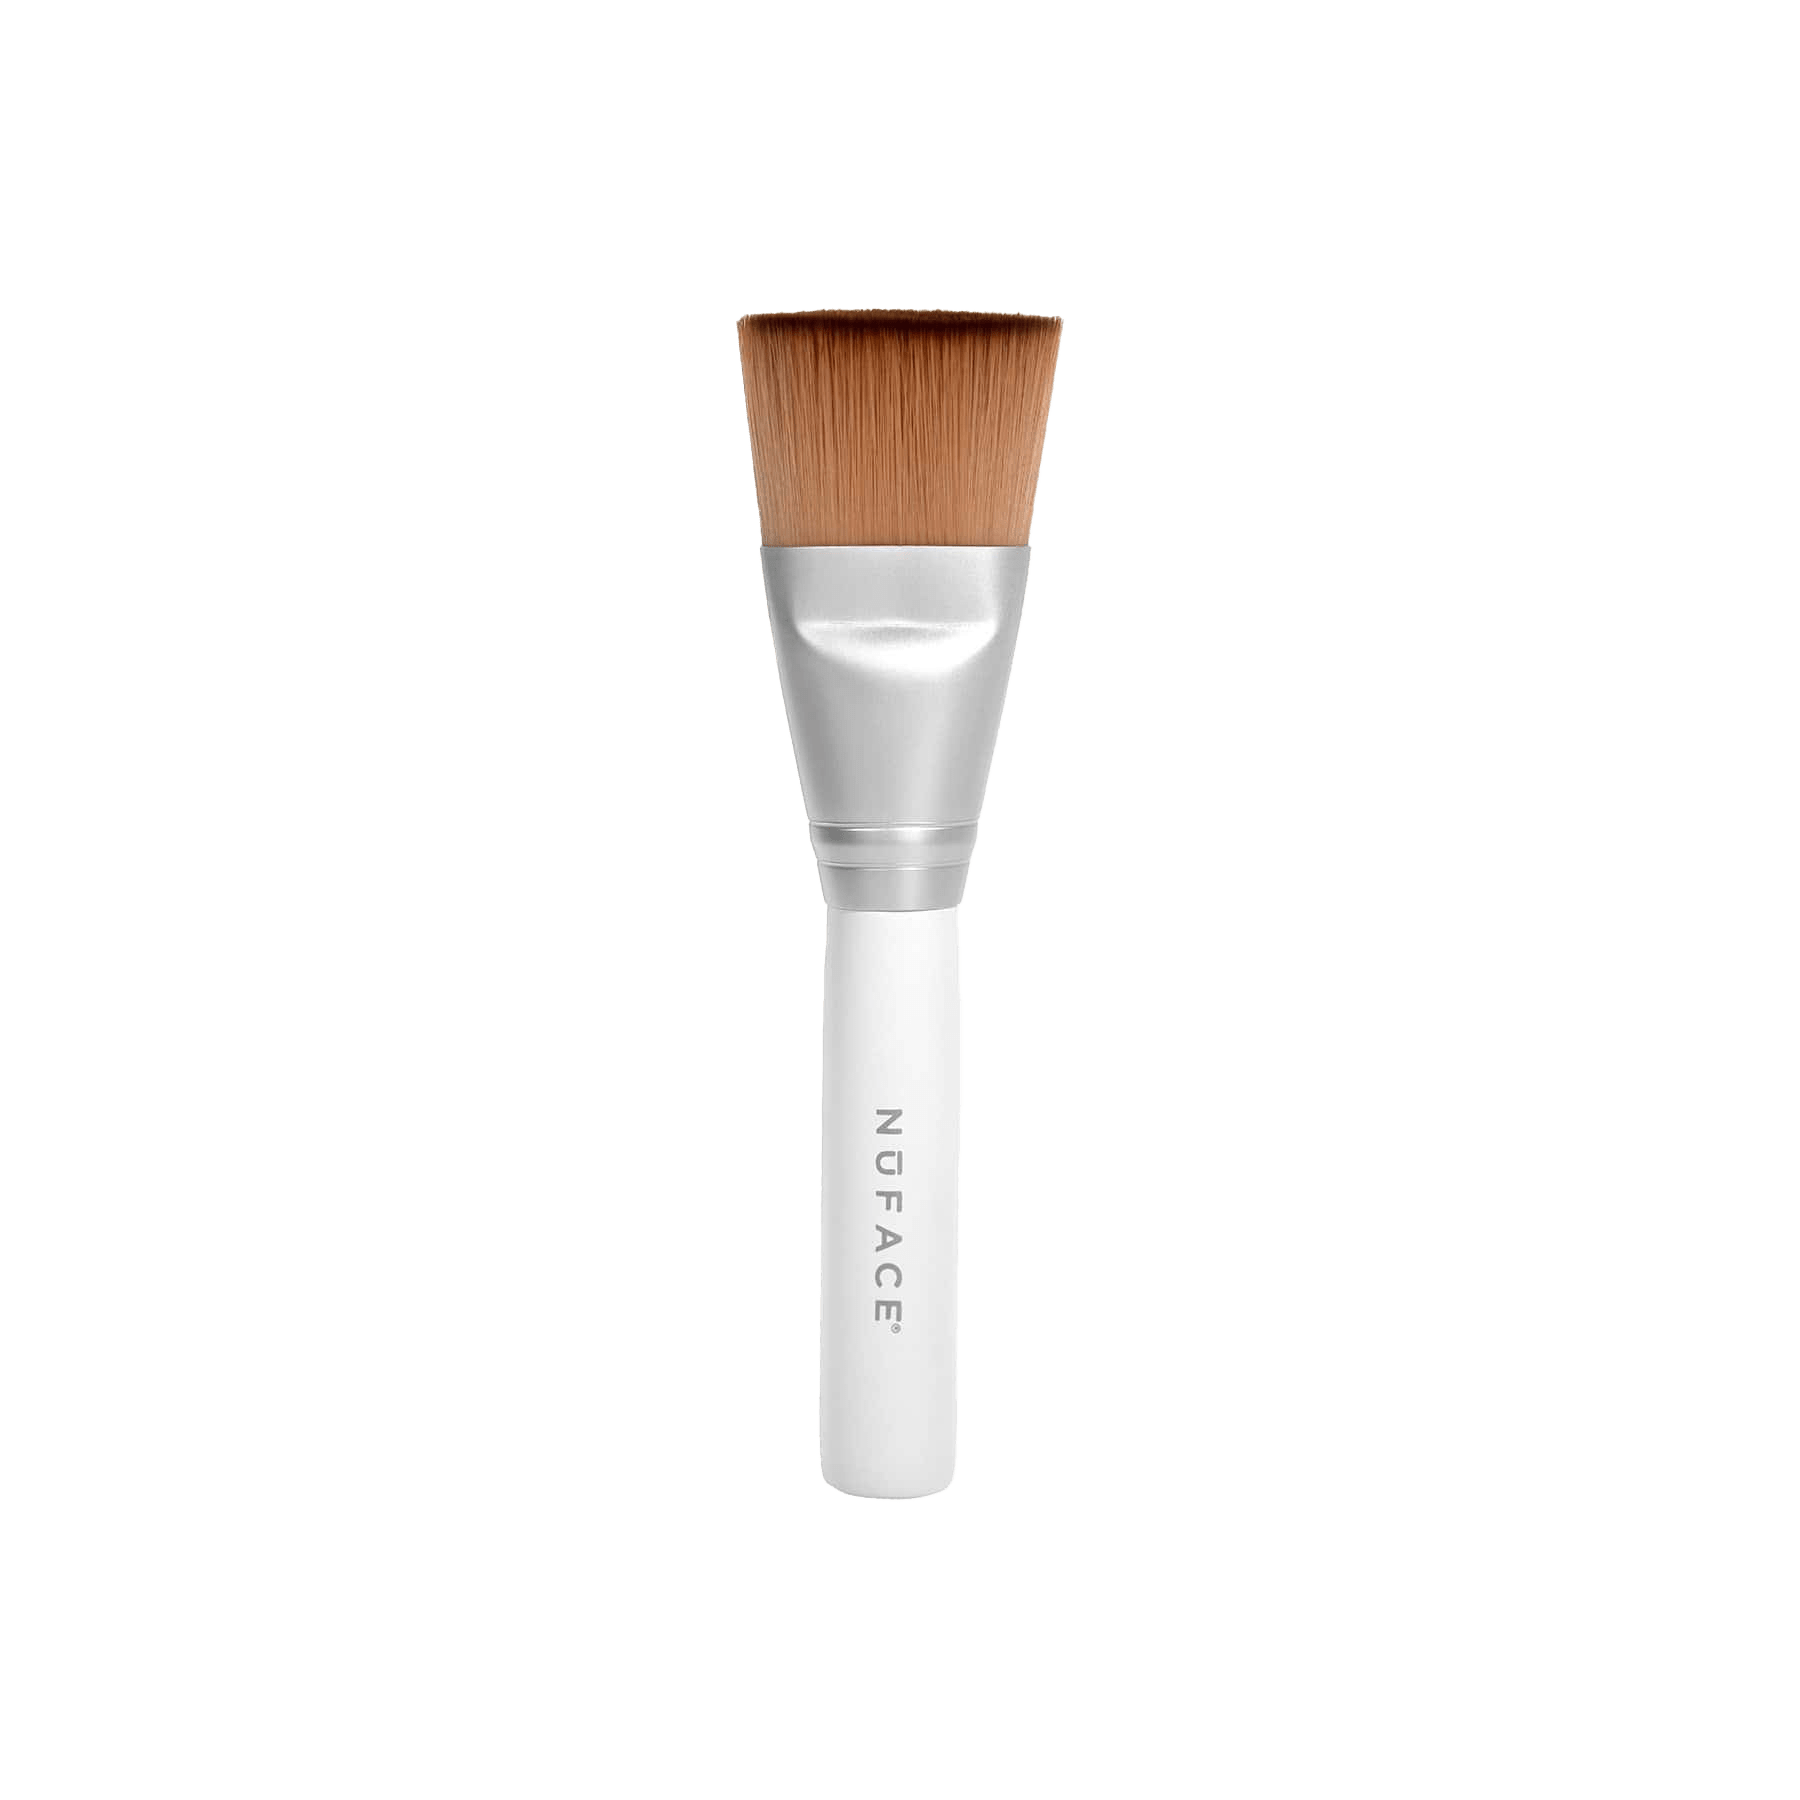 NuFACE Clean Sweep Applicator Brush